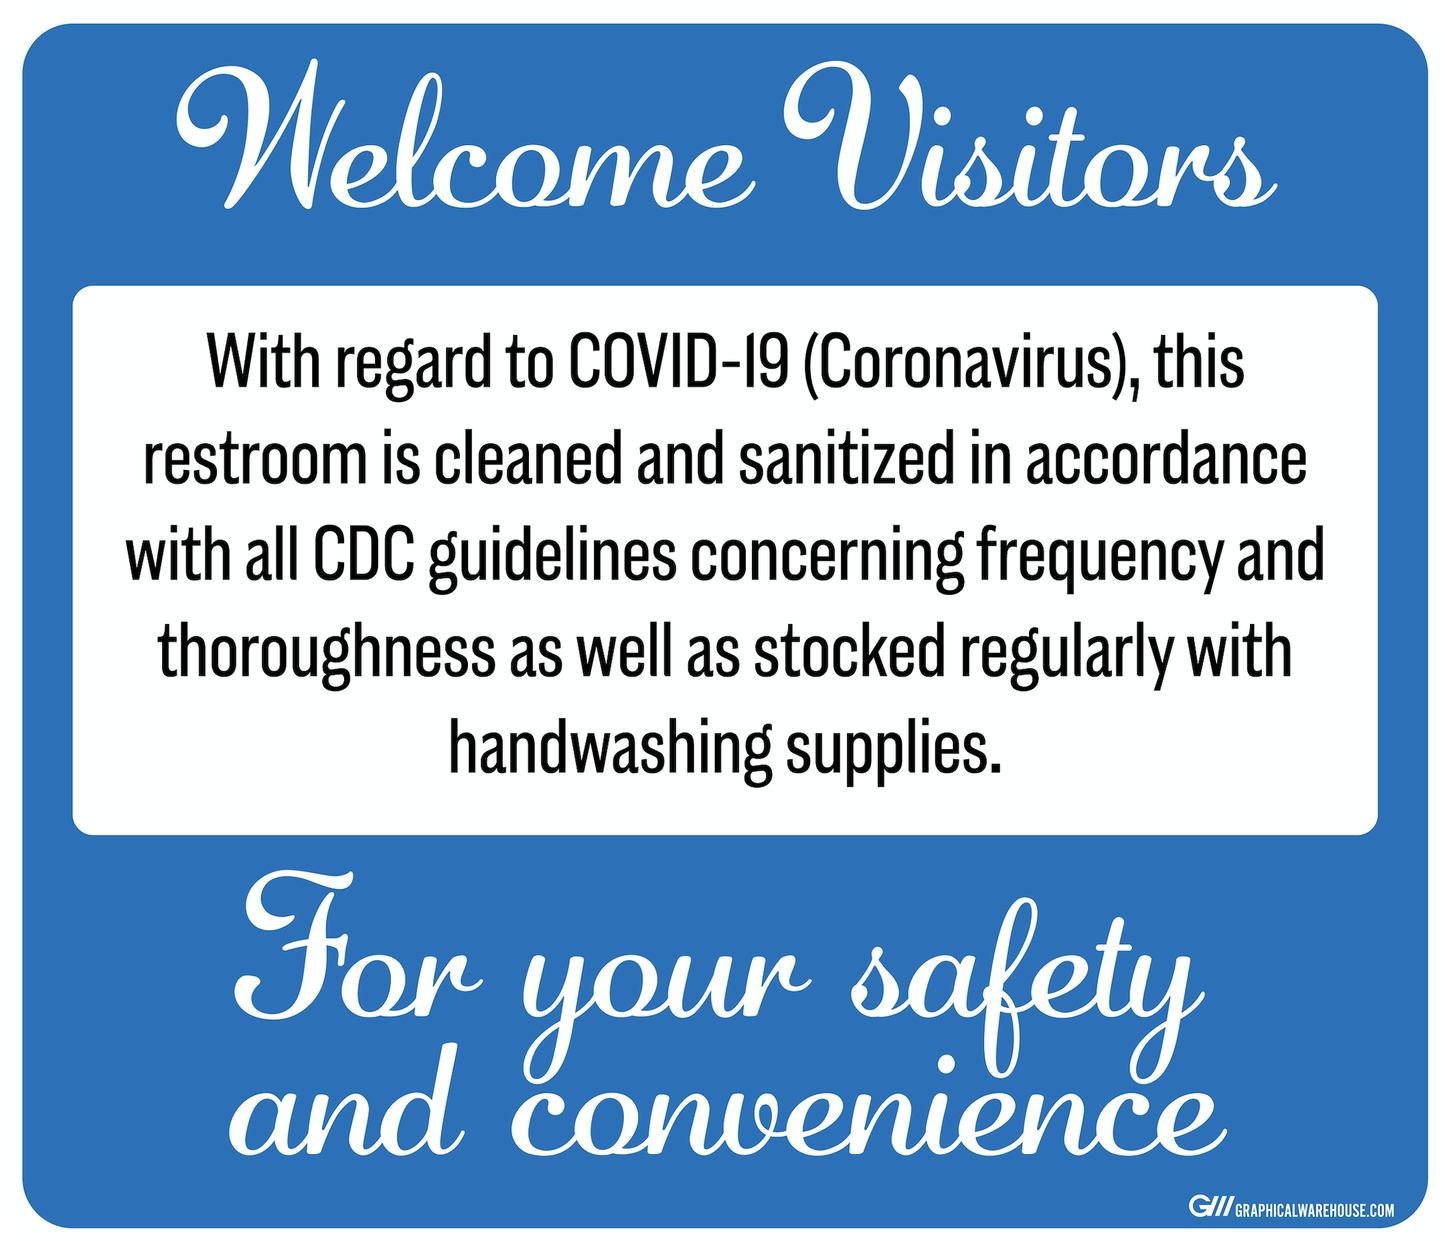 "Restroom Cleaned and Sanitized" Adhesive Durable Vinyl Decal- Various Sizes/Colors Available